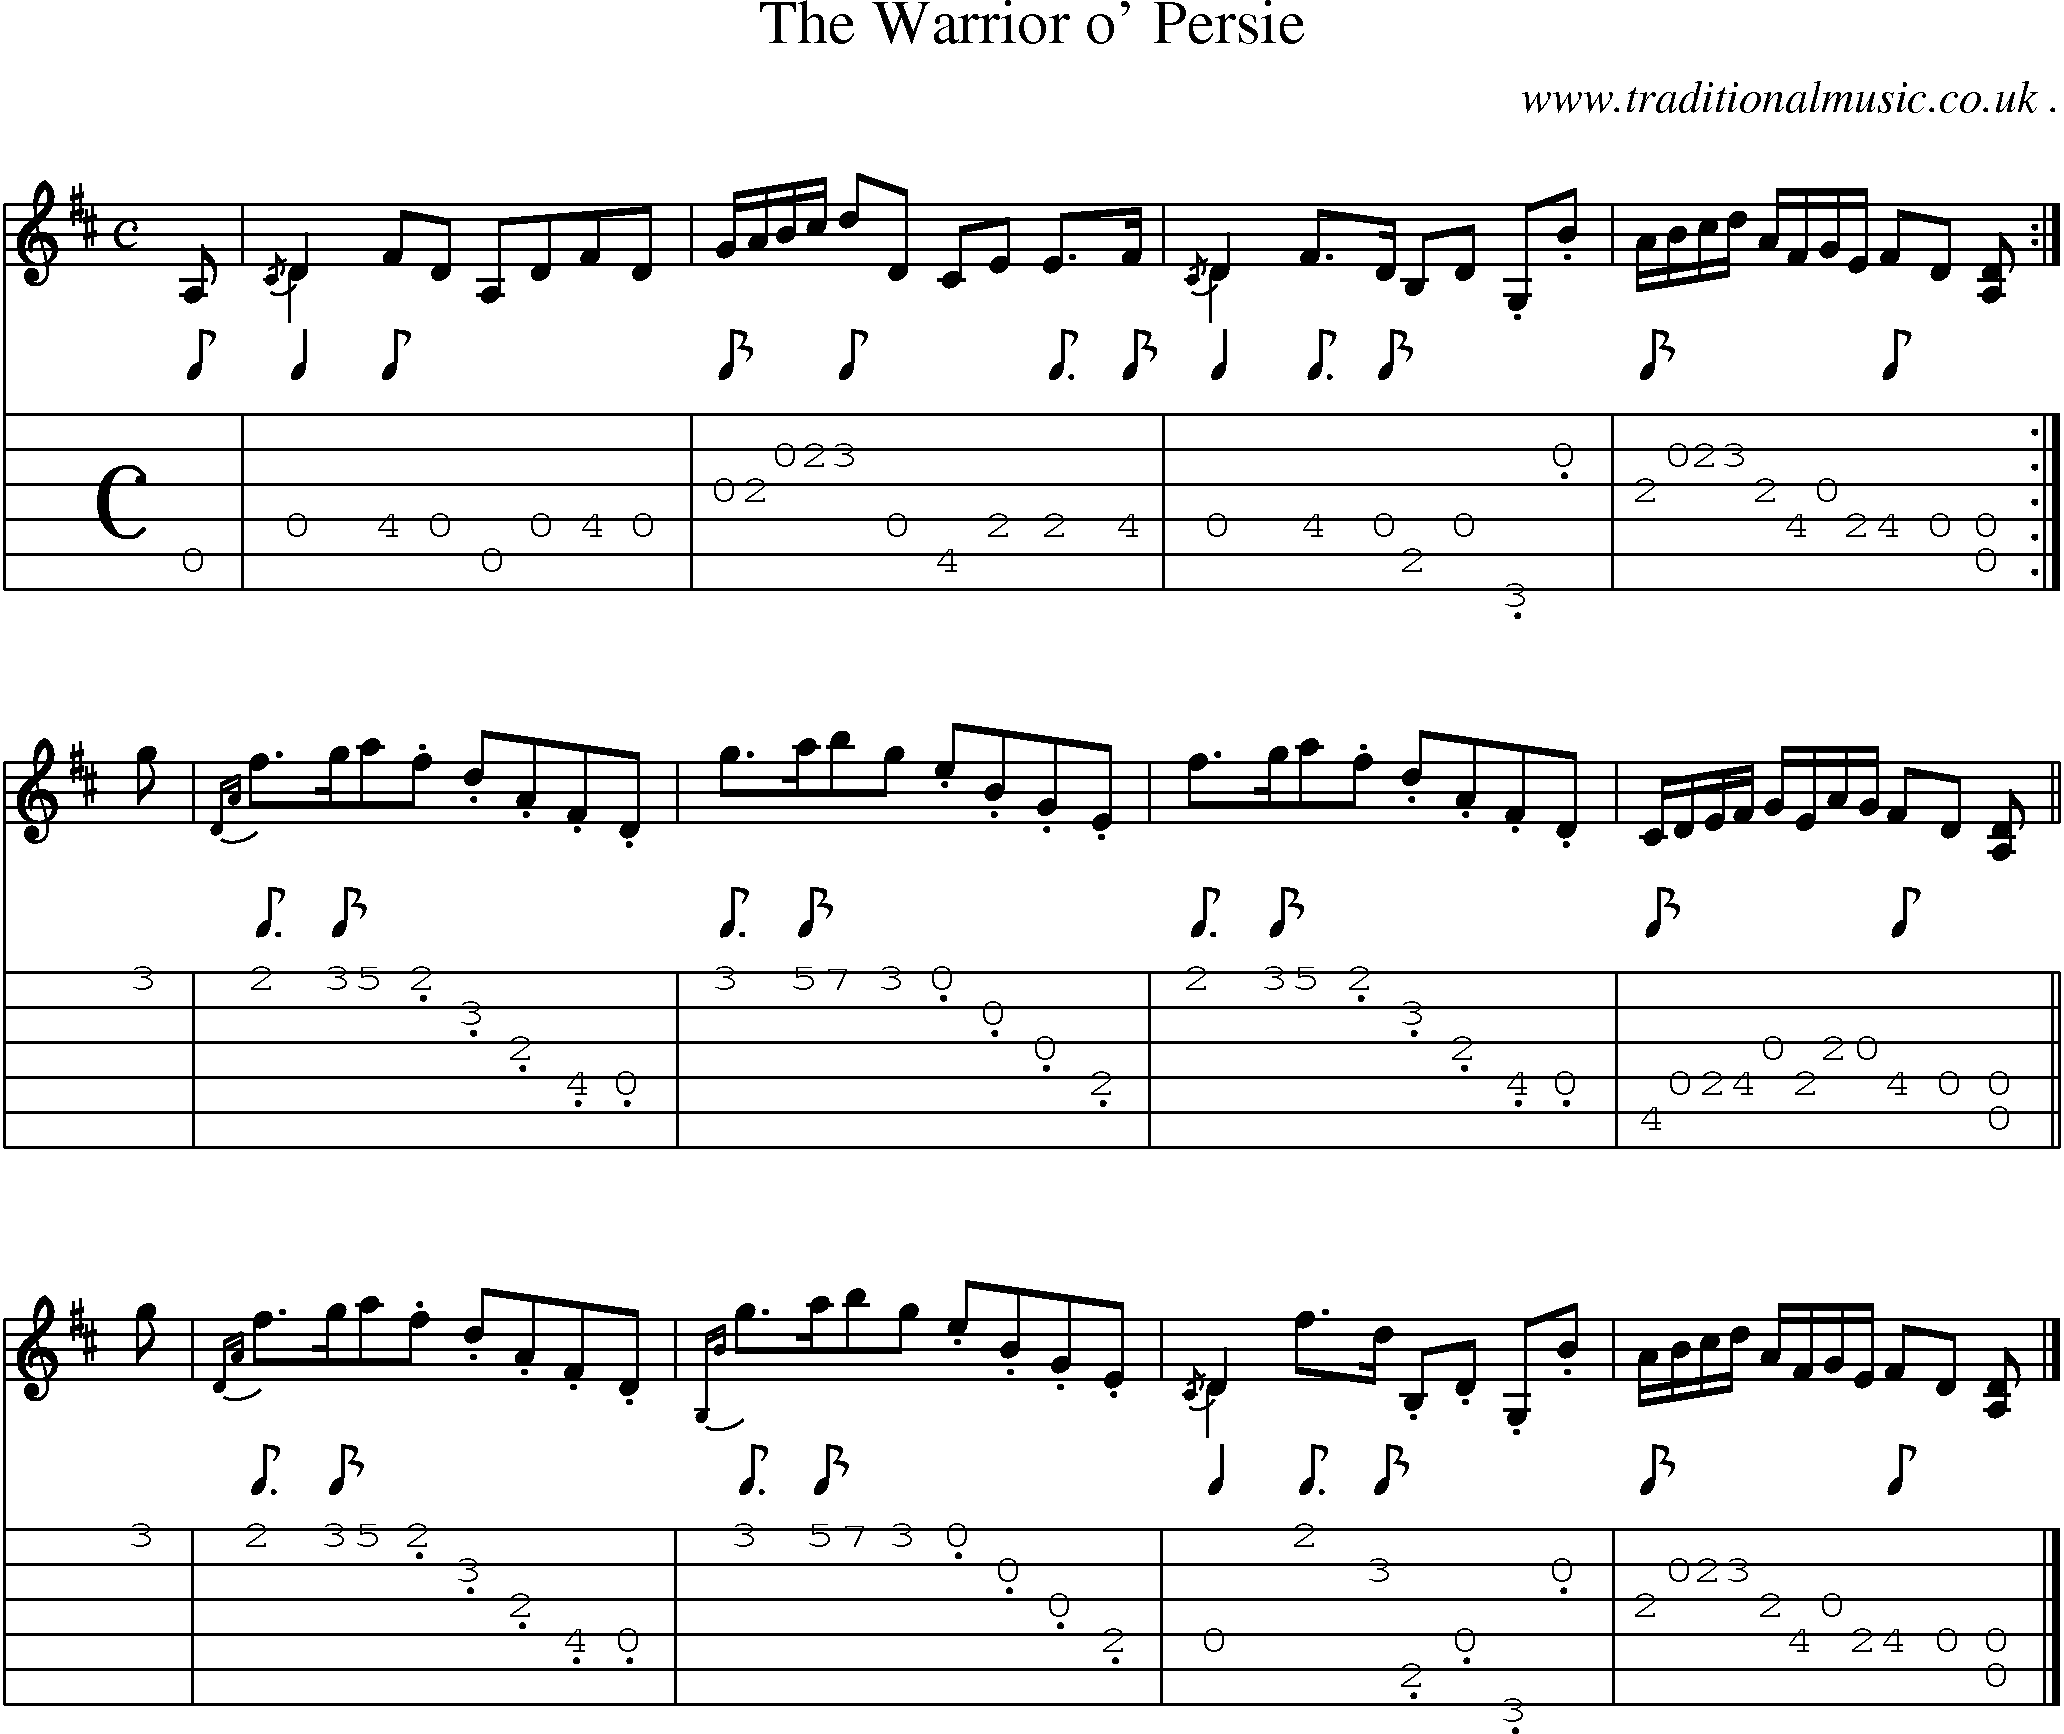 Sheet-music  score, Chords and Guitar Tabs for The Warrior O Persie